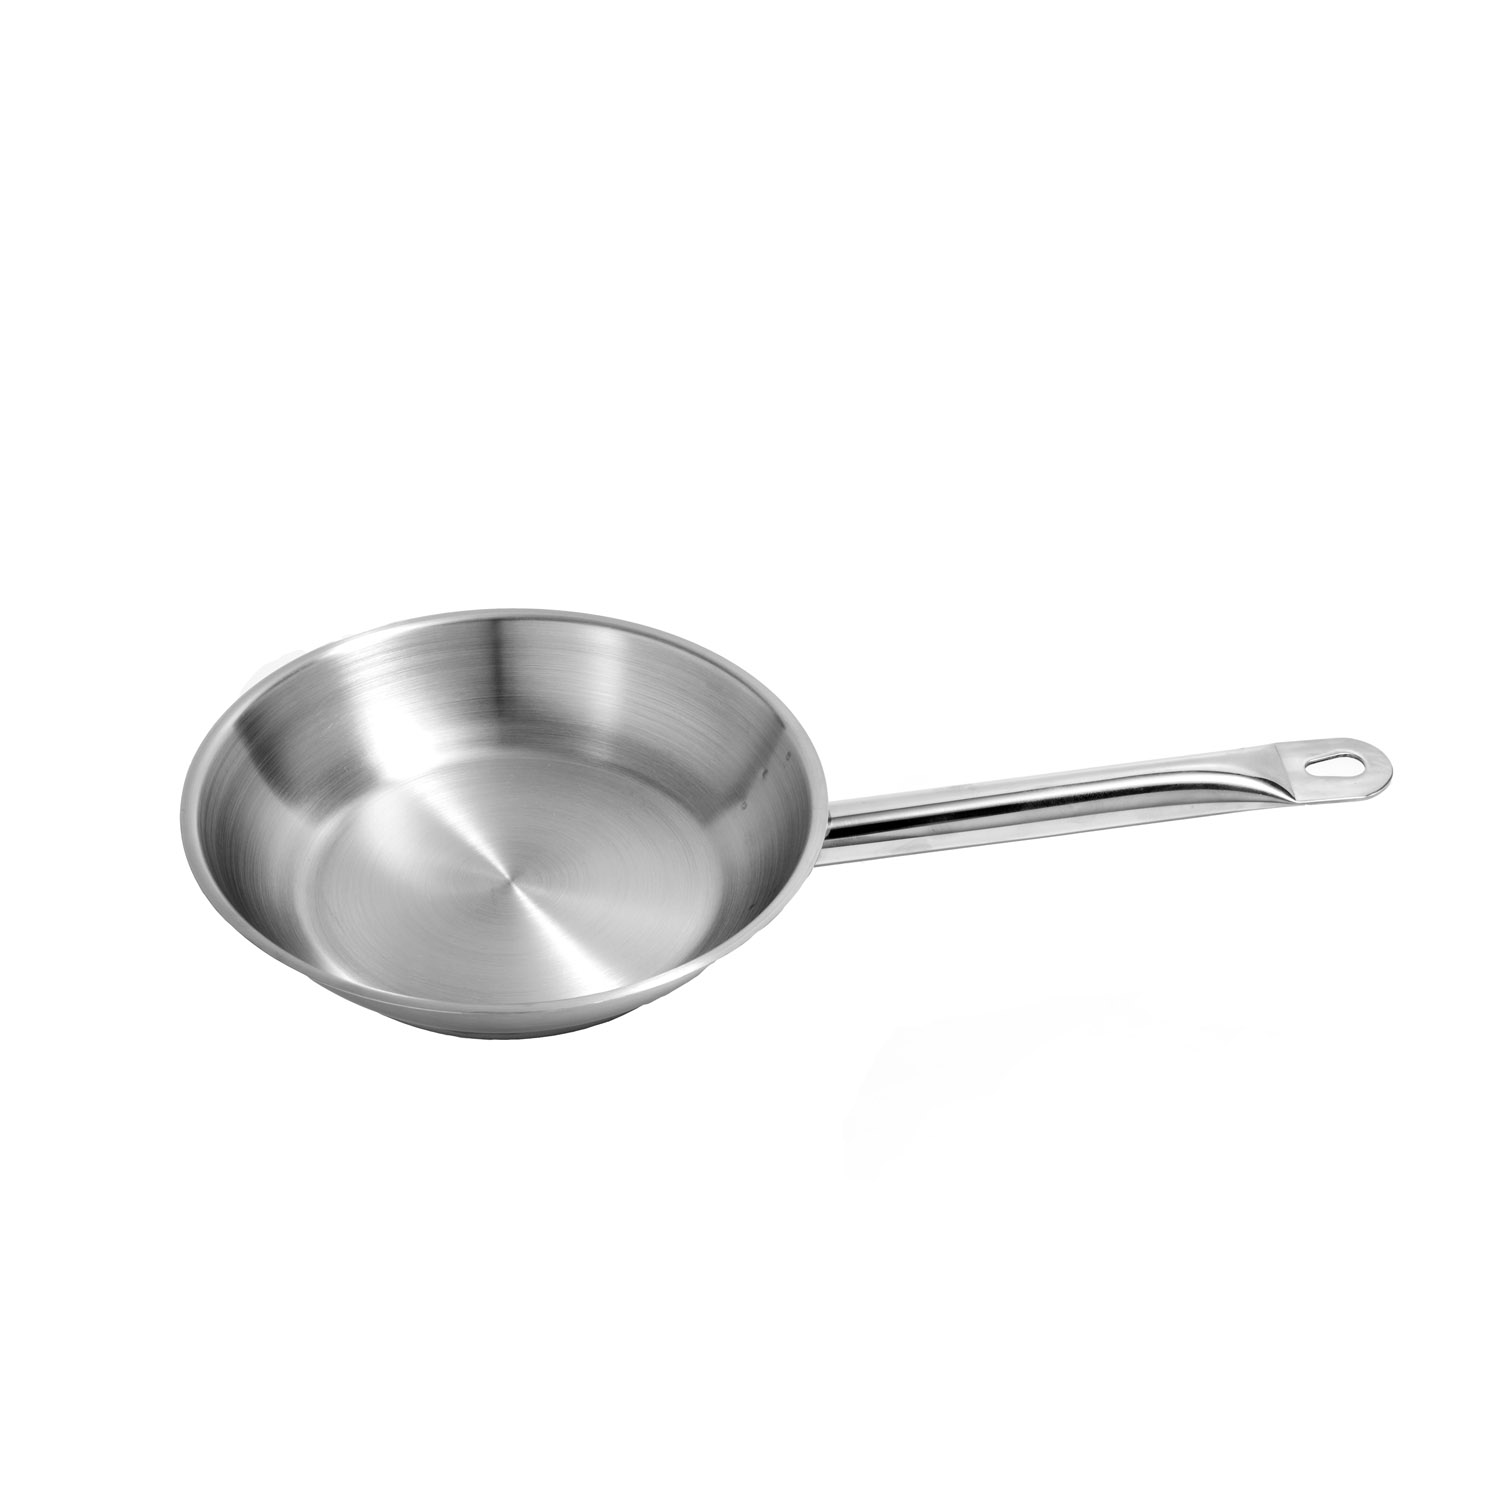 CAC China S1FP-11 Stainless Steel Fry Pan 11"